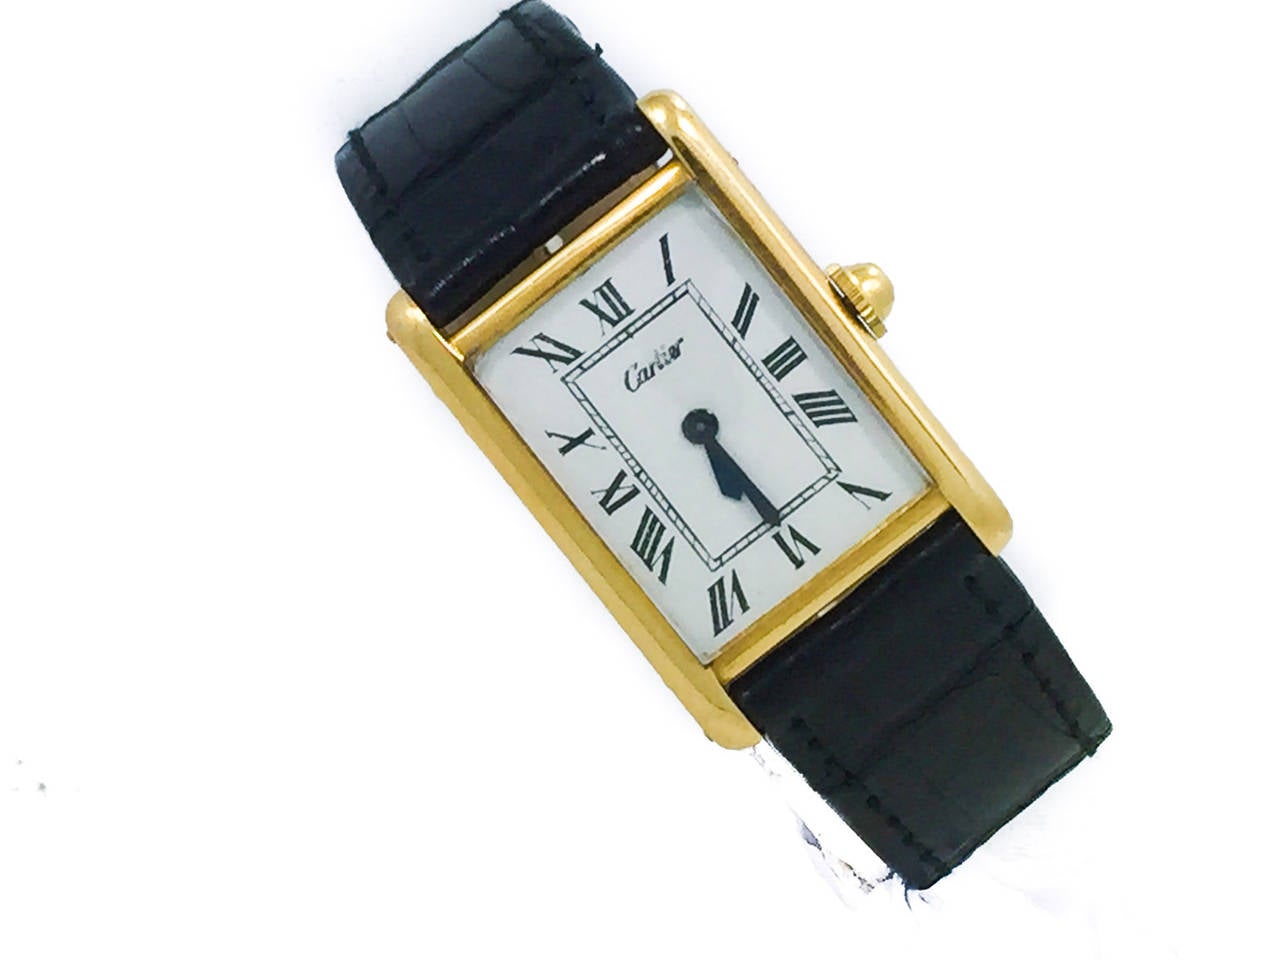 Vintage Cartier London 18k yellow Gold Tank that Dates to the 1950's and Features a Jaeger LeCoultre Movement. This watch is Considered XL for the time it was made in, it measures 22x34mm. The Watch is in Great Condition & Keeping Perfect Time. The